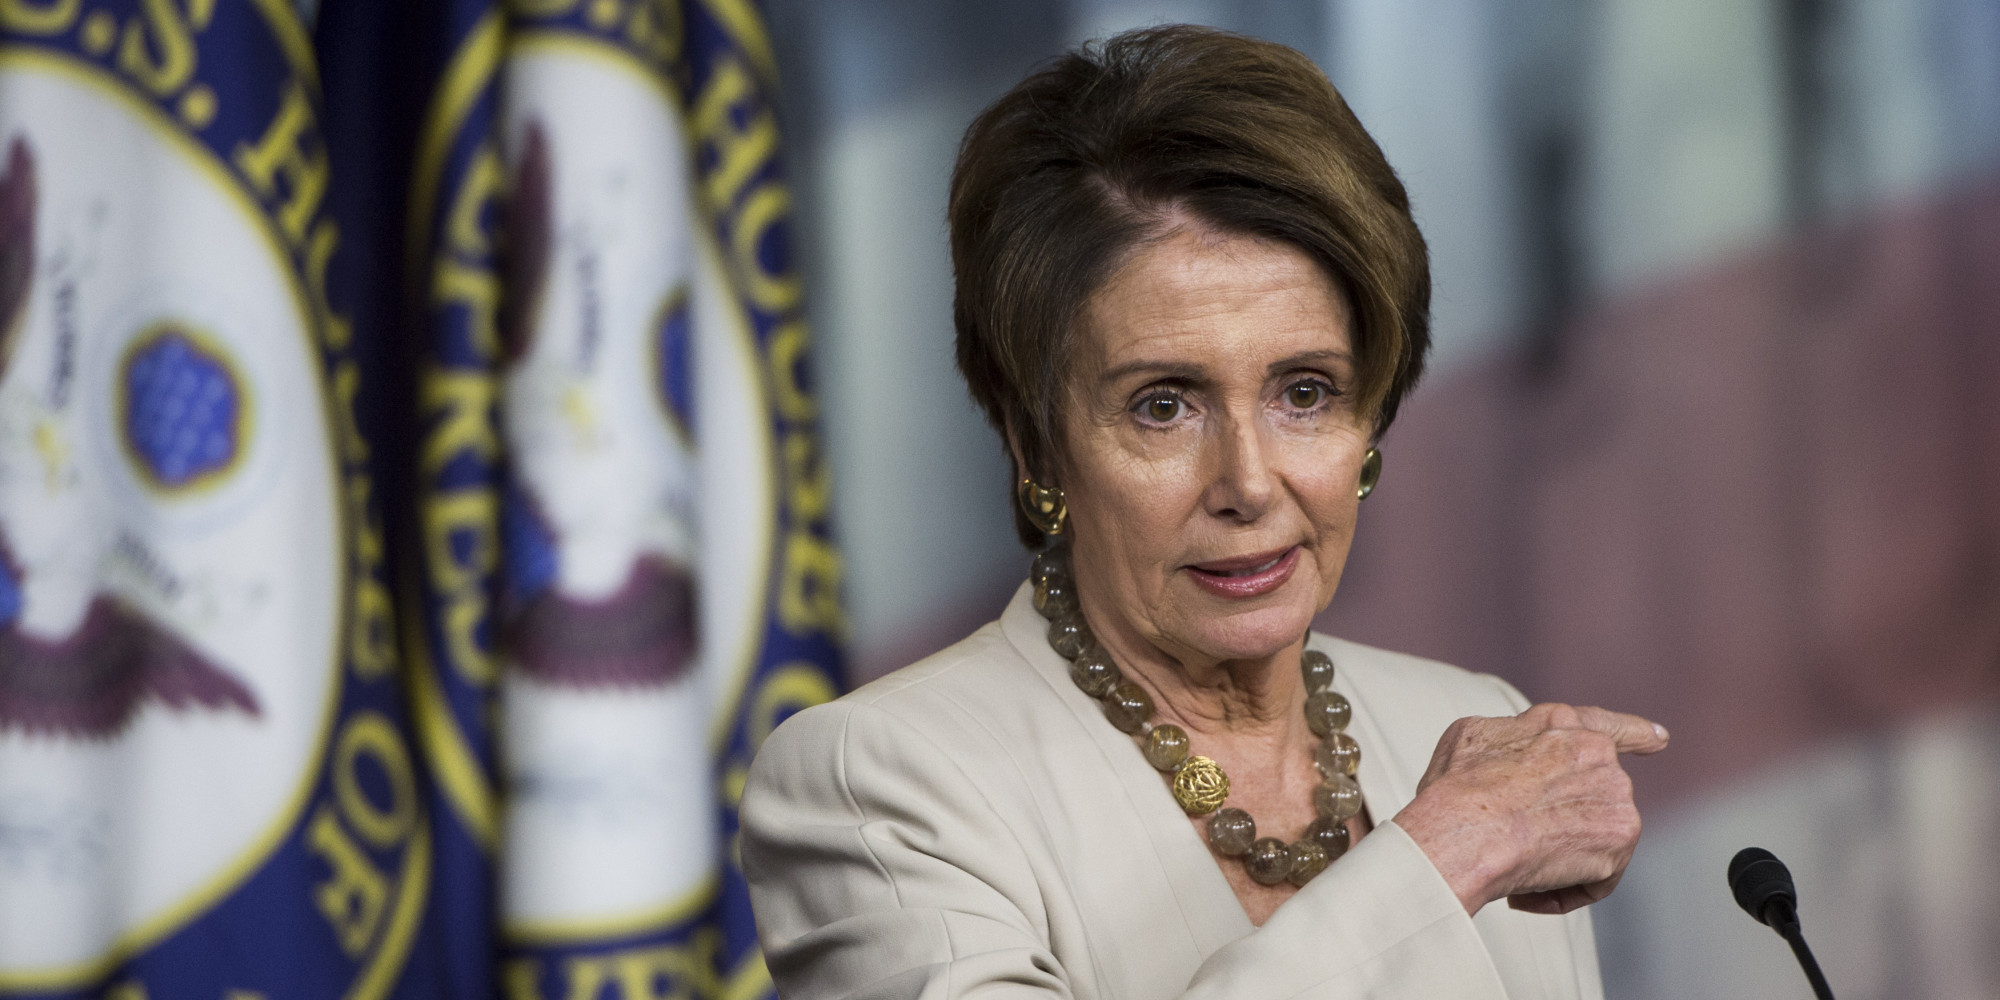 Nancy Pelosi: Democrats 'Stand Tall' For Obamacare Ahead Of 2014 Elections